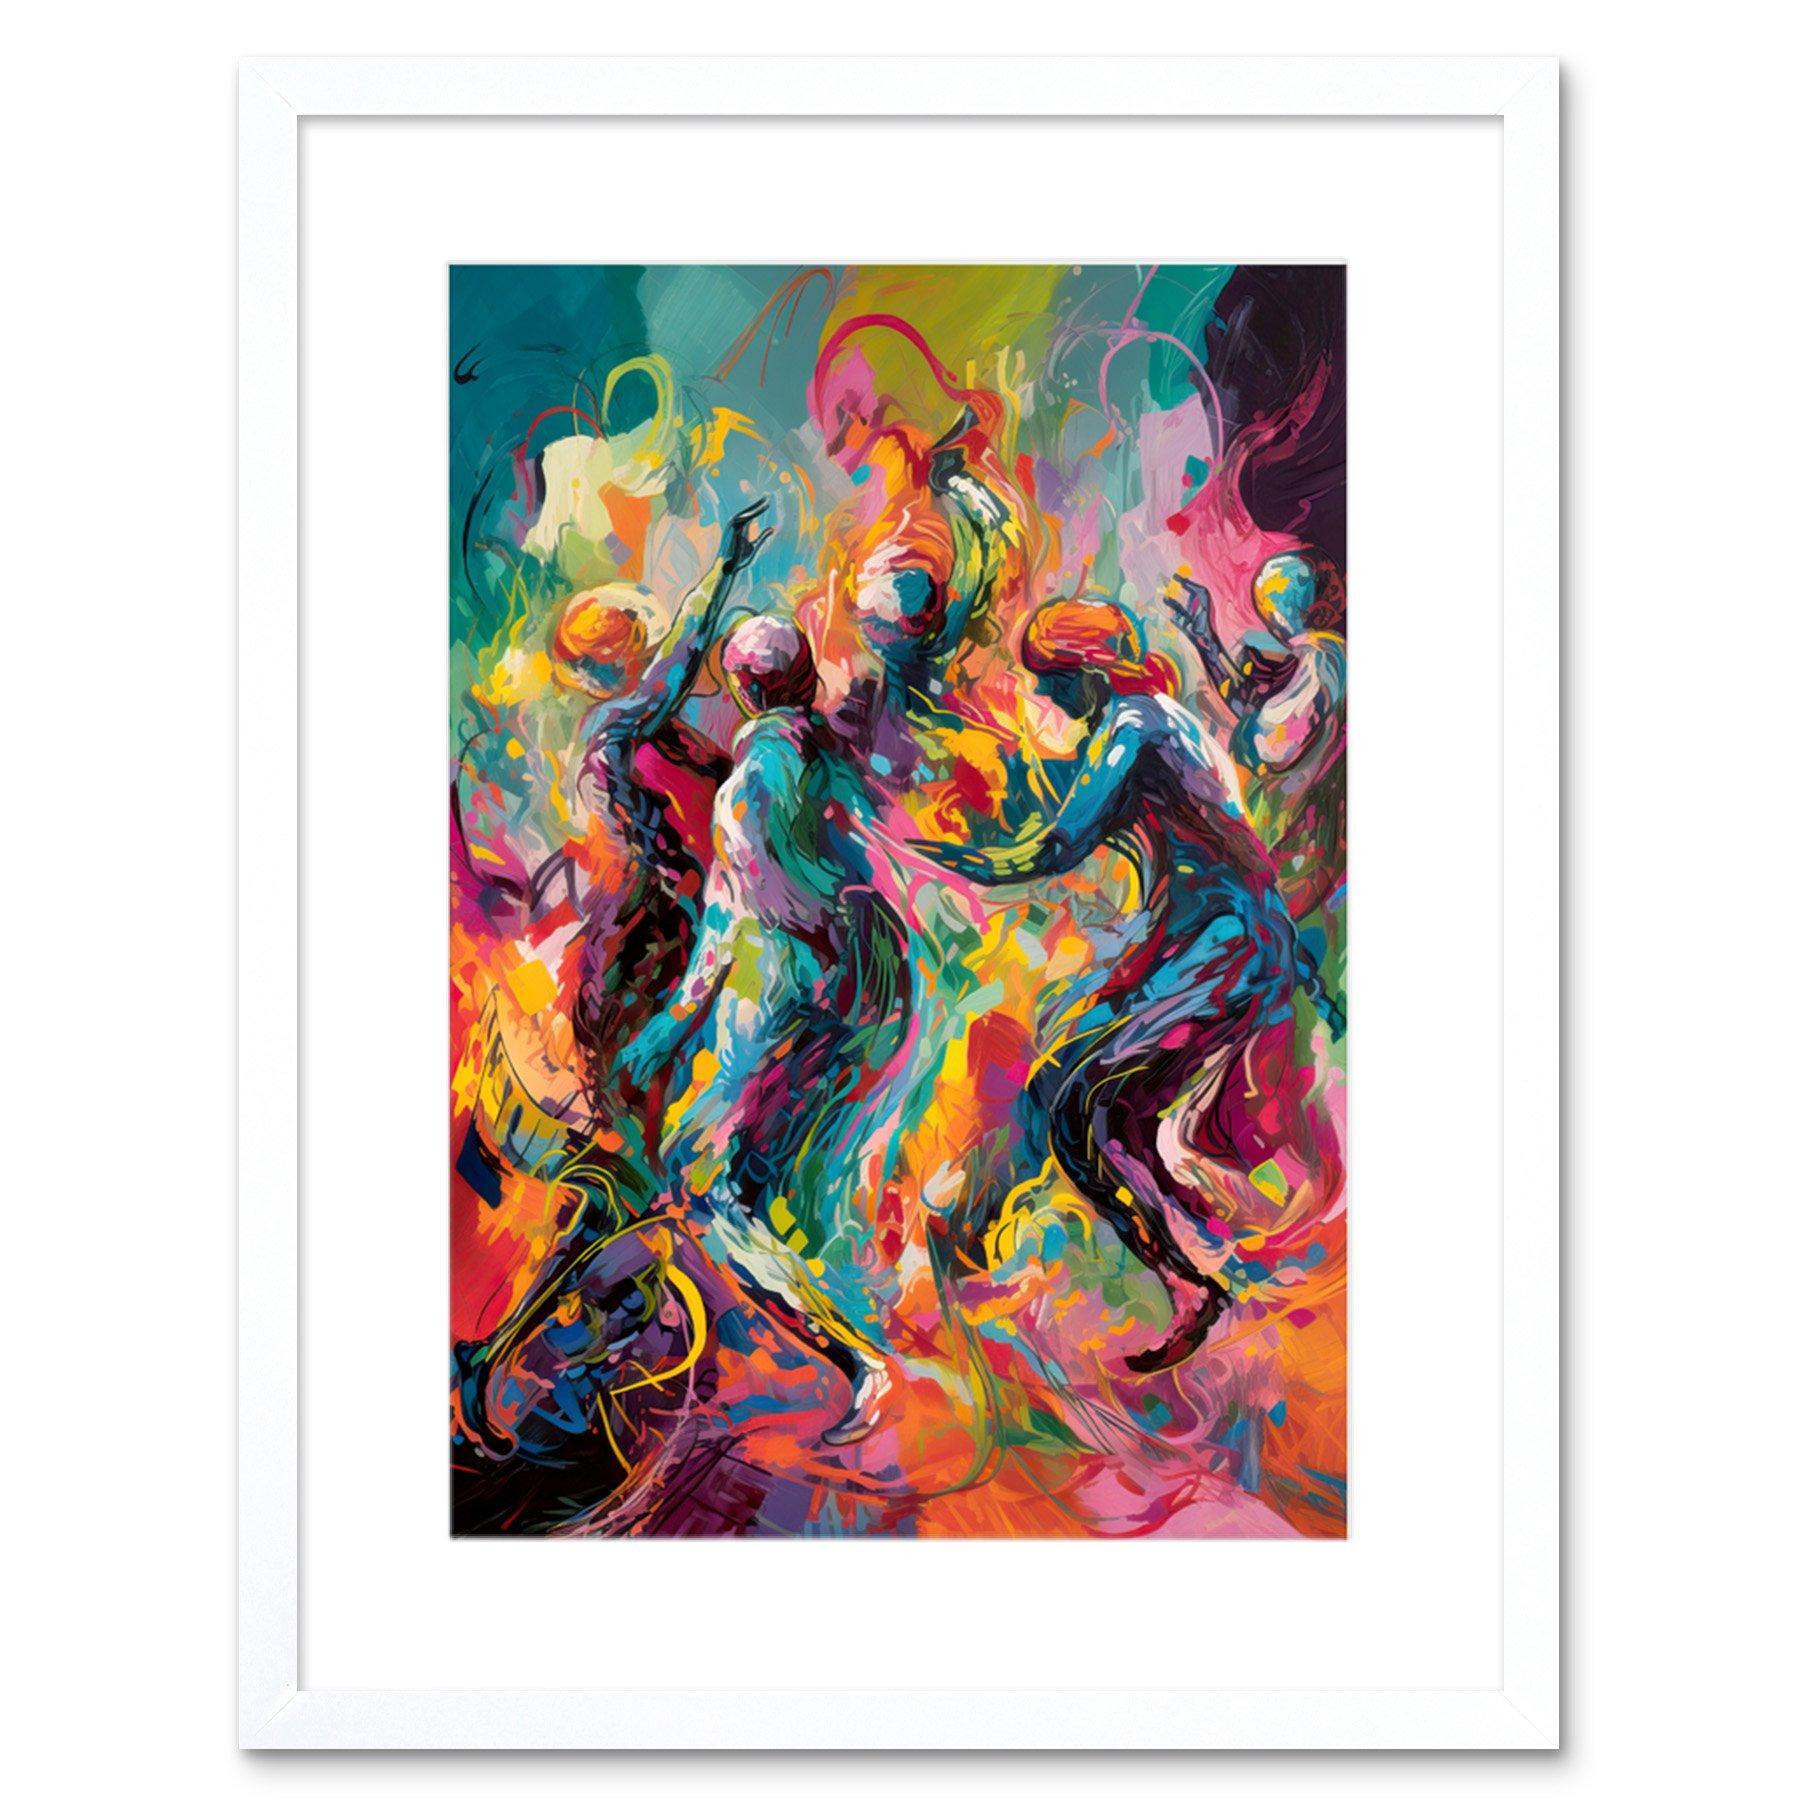 Abstract Figures Vibrant Dance Expression Artwork Framed Wall Art Print 9X7 Inch - image 1